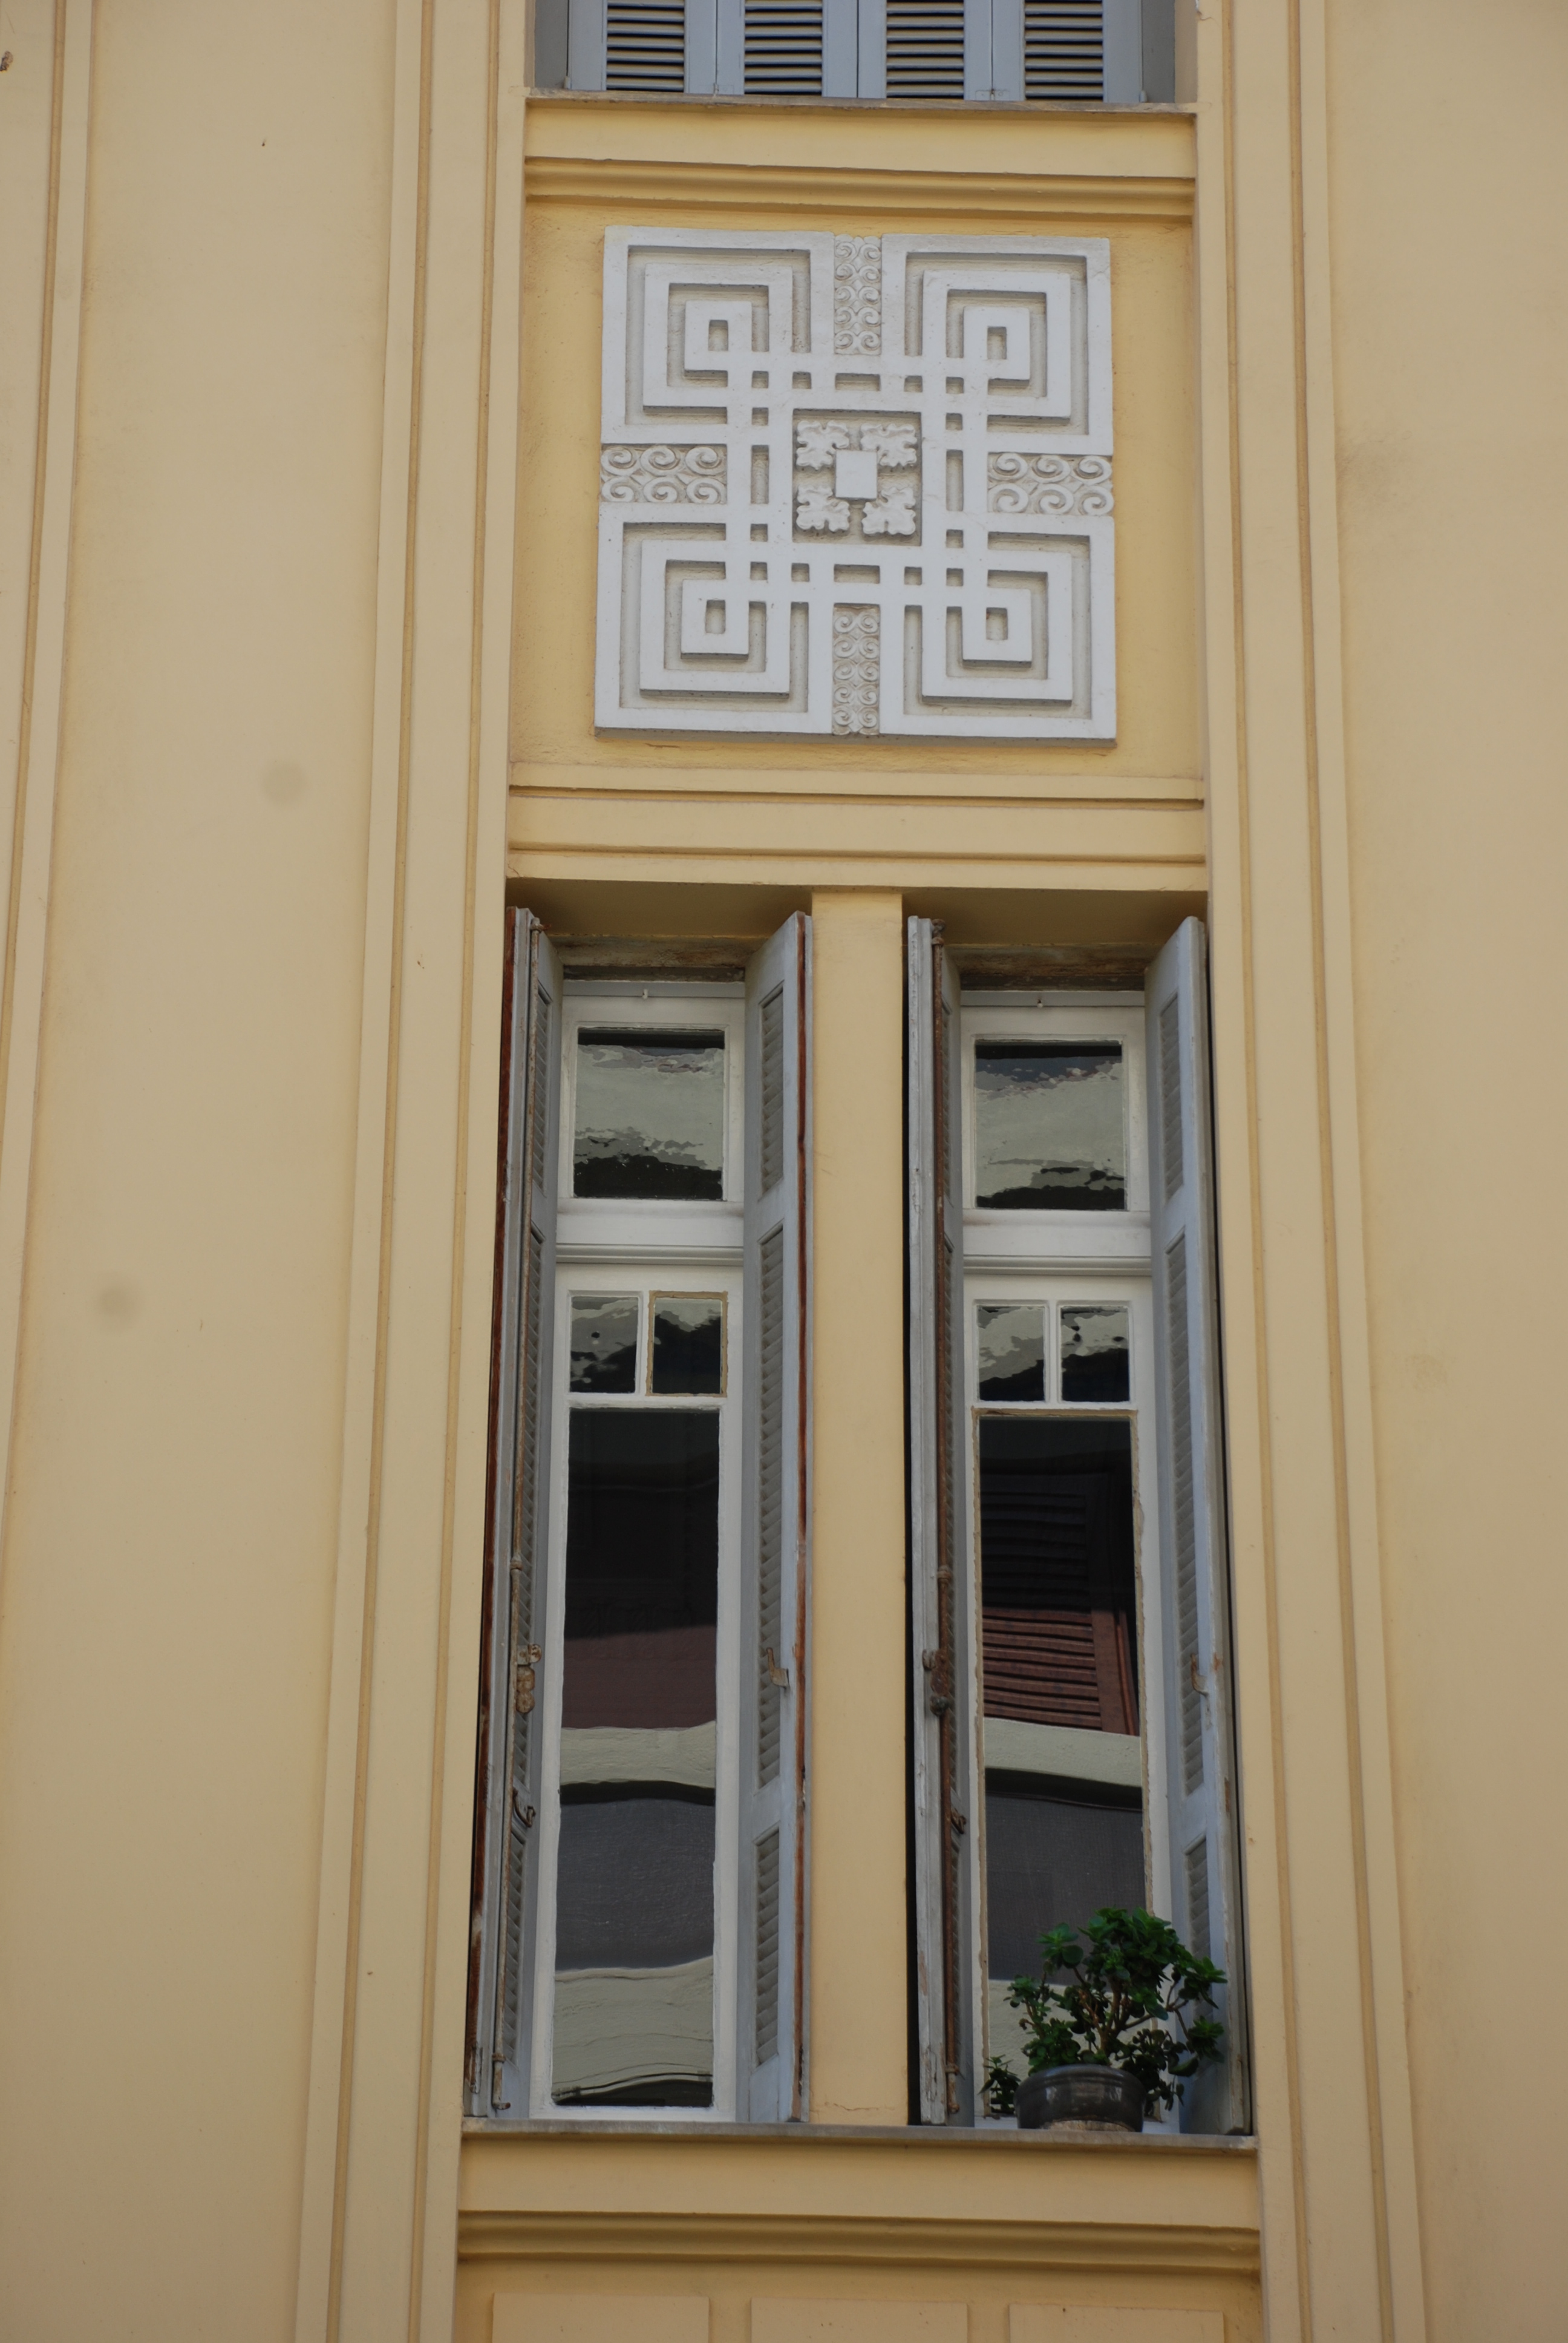 General view of window